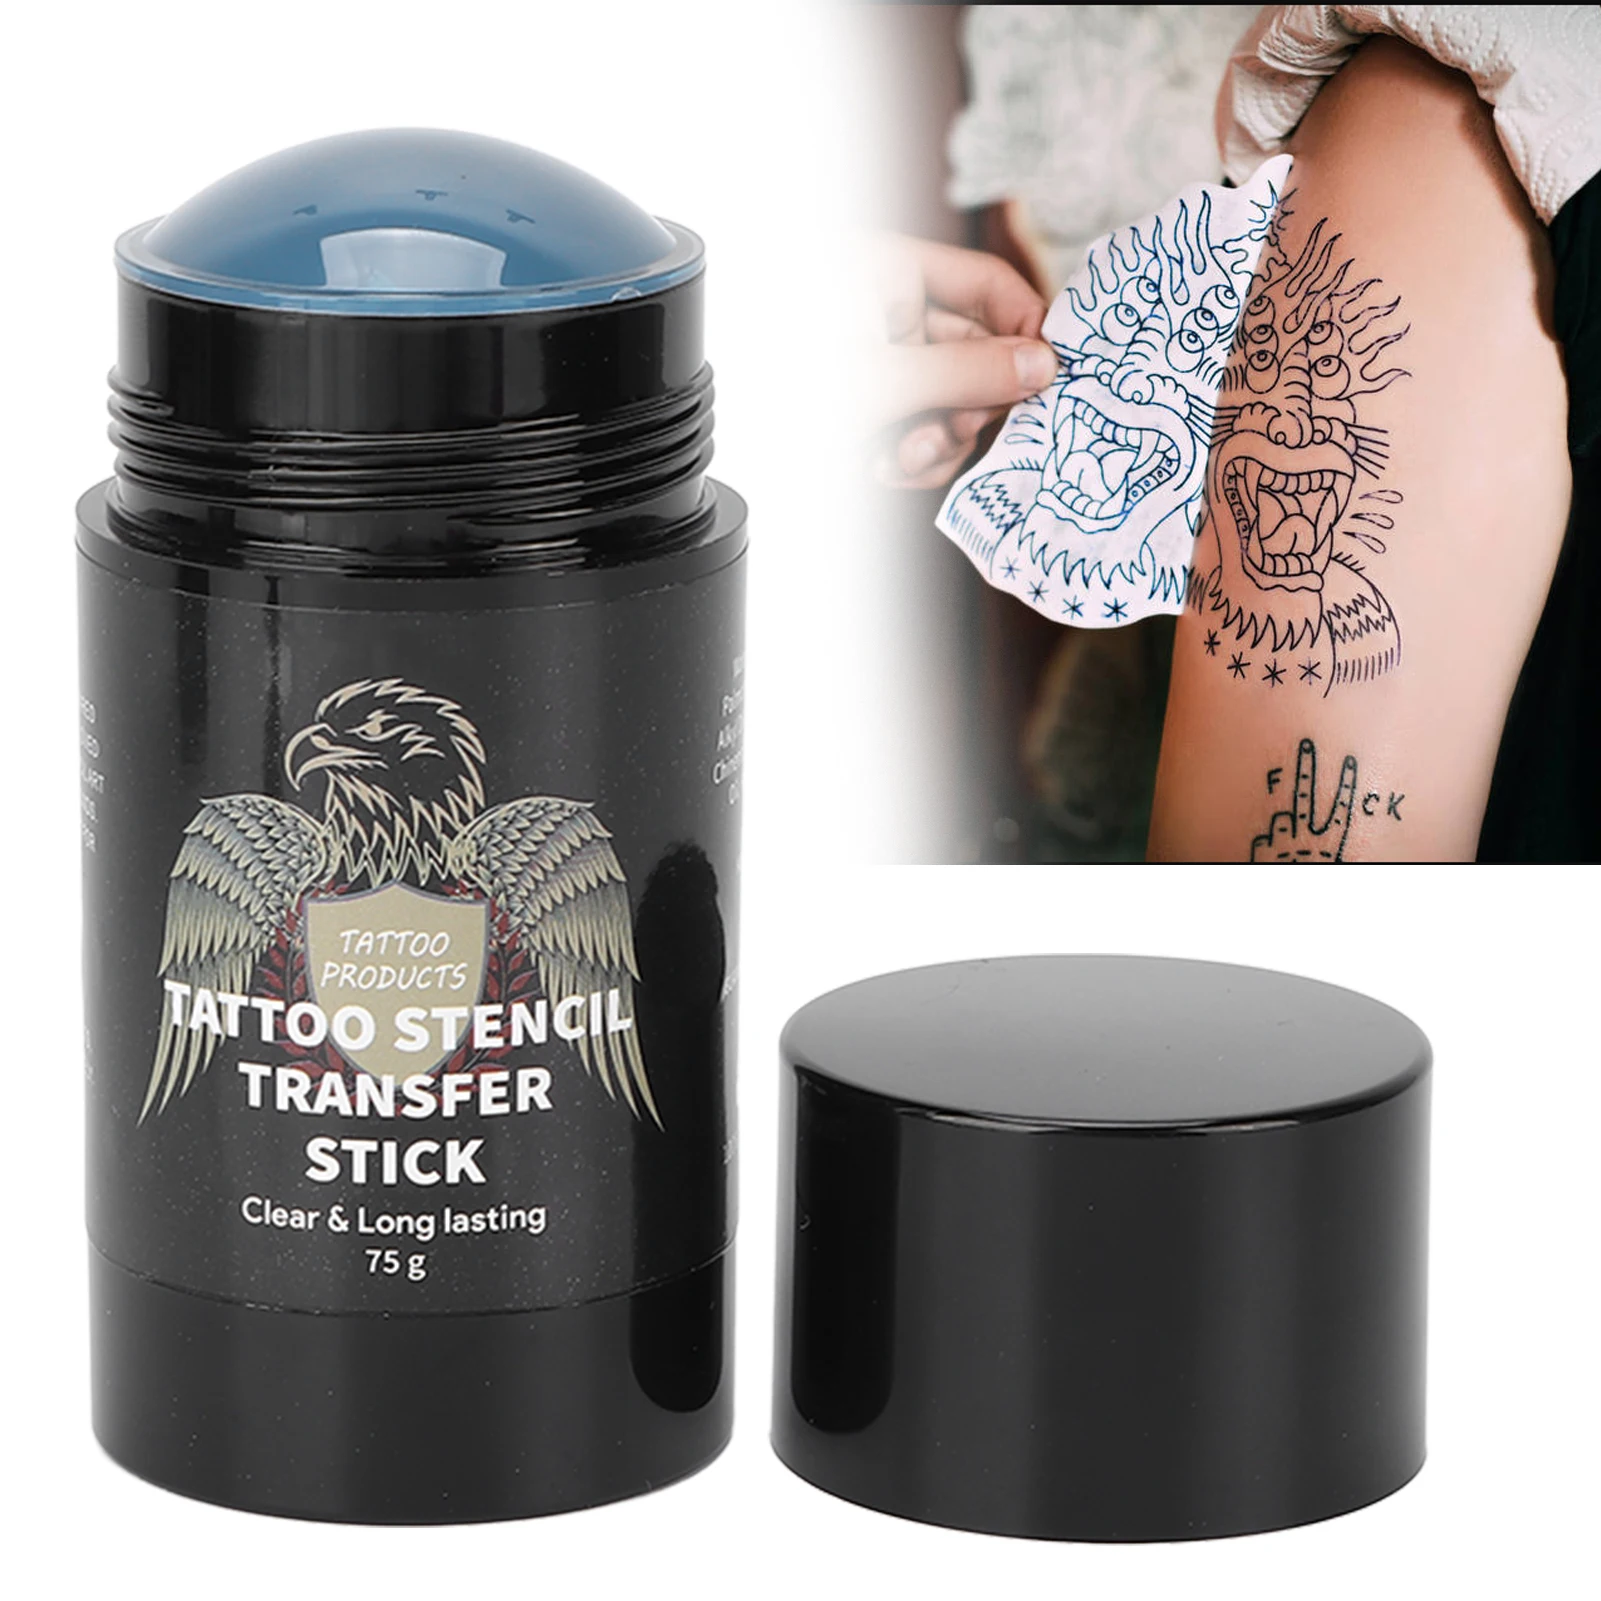 25g Tattoo Cream Diy Universal Plant Extracts Semipermanent Tattoo  Ointment For Leg Arm Drawing Fake Freckles  Tattoo Inks  AliExpress